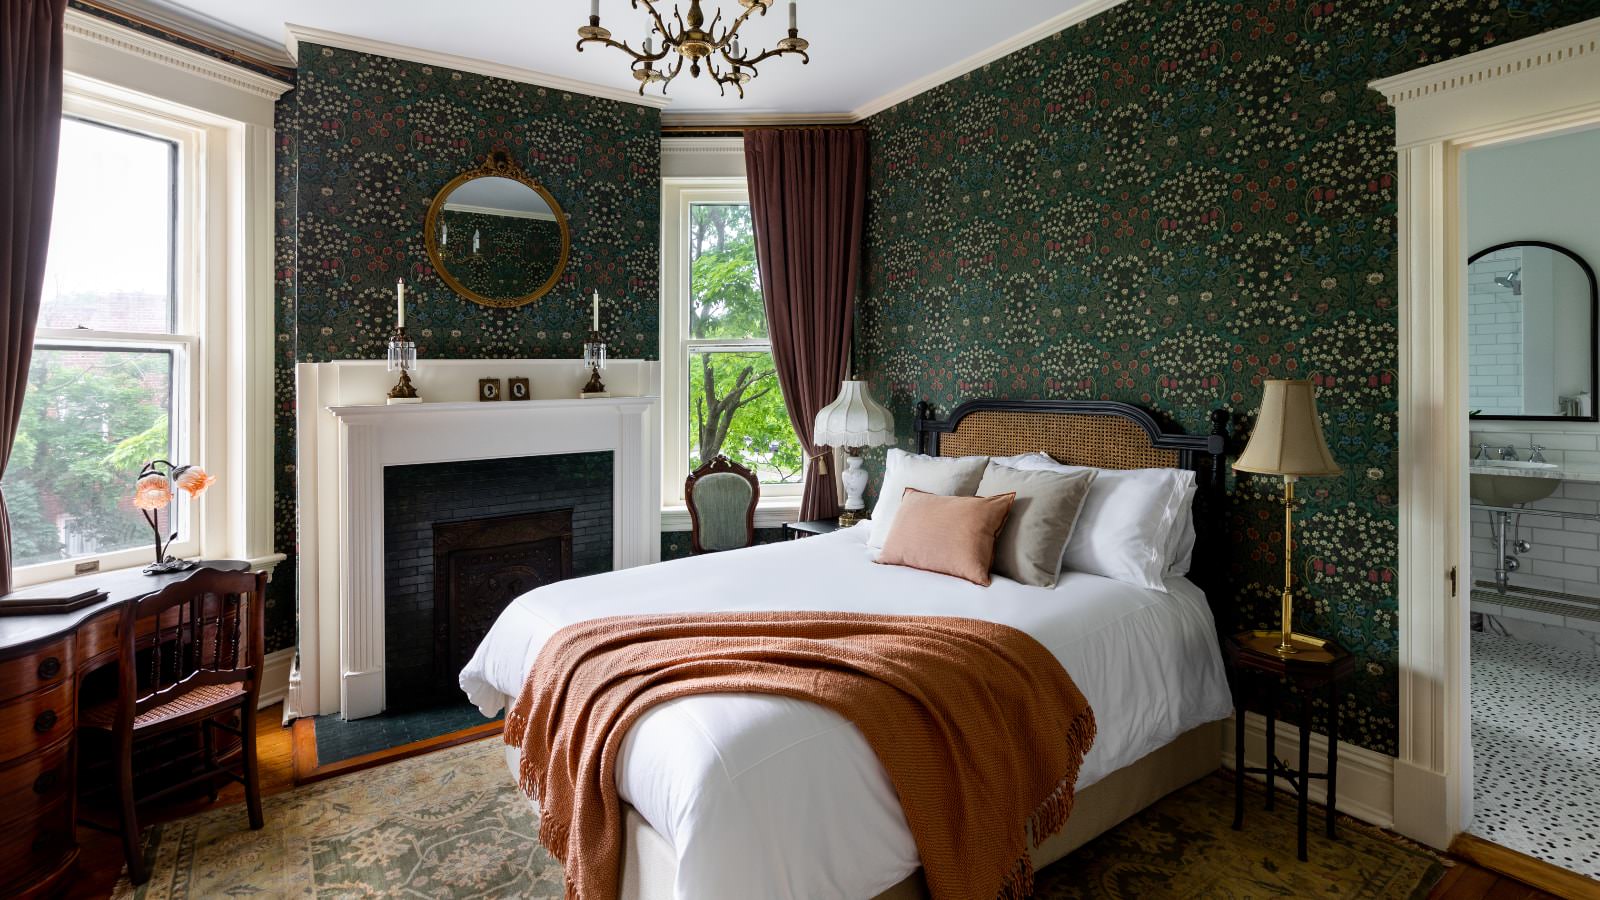 Bedroom with dark green ornate wallpaper, white trim, hardwood flooring, bed with white bedding, wooden antique desk, fireplace, and large windows